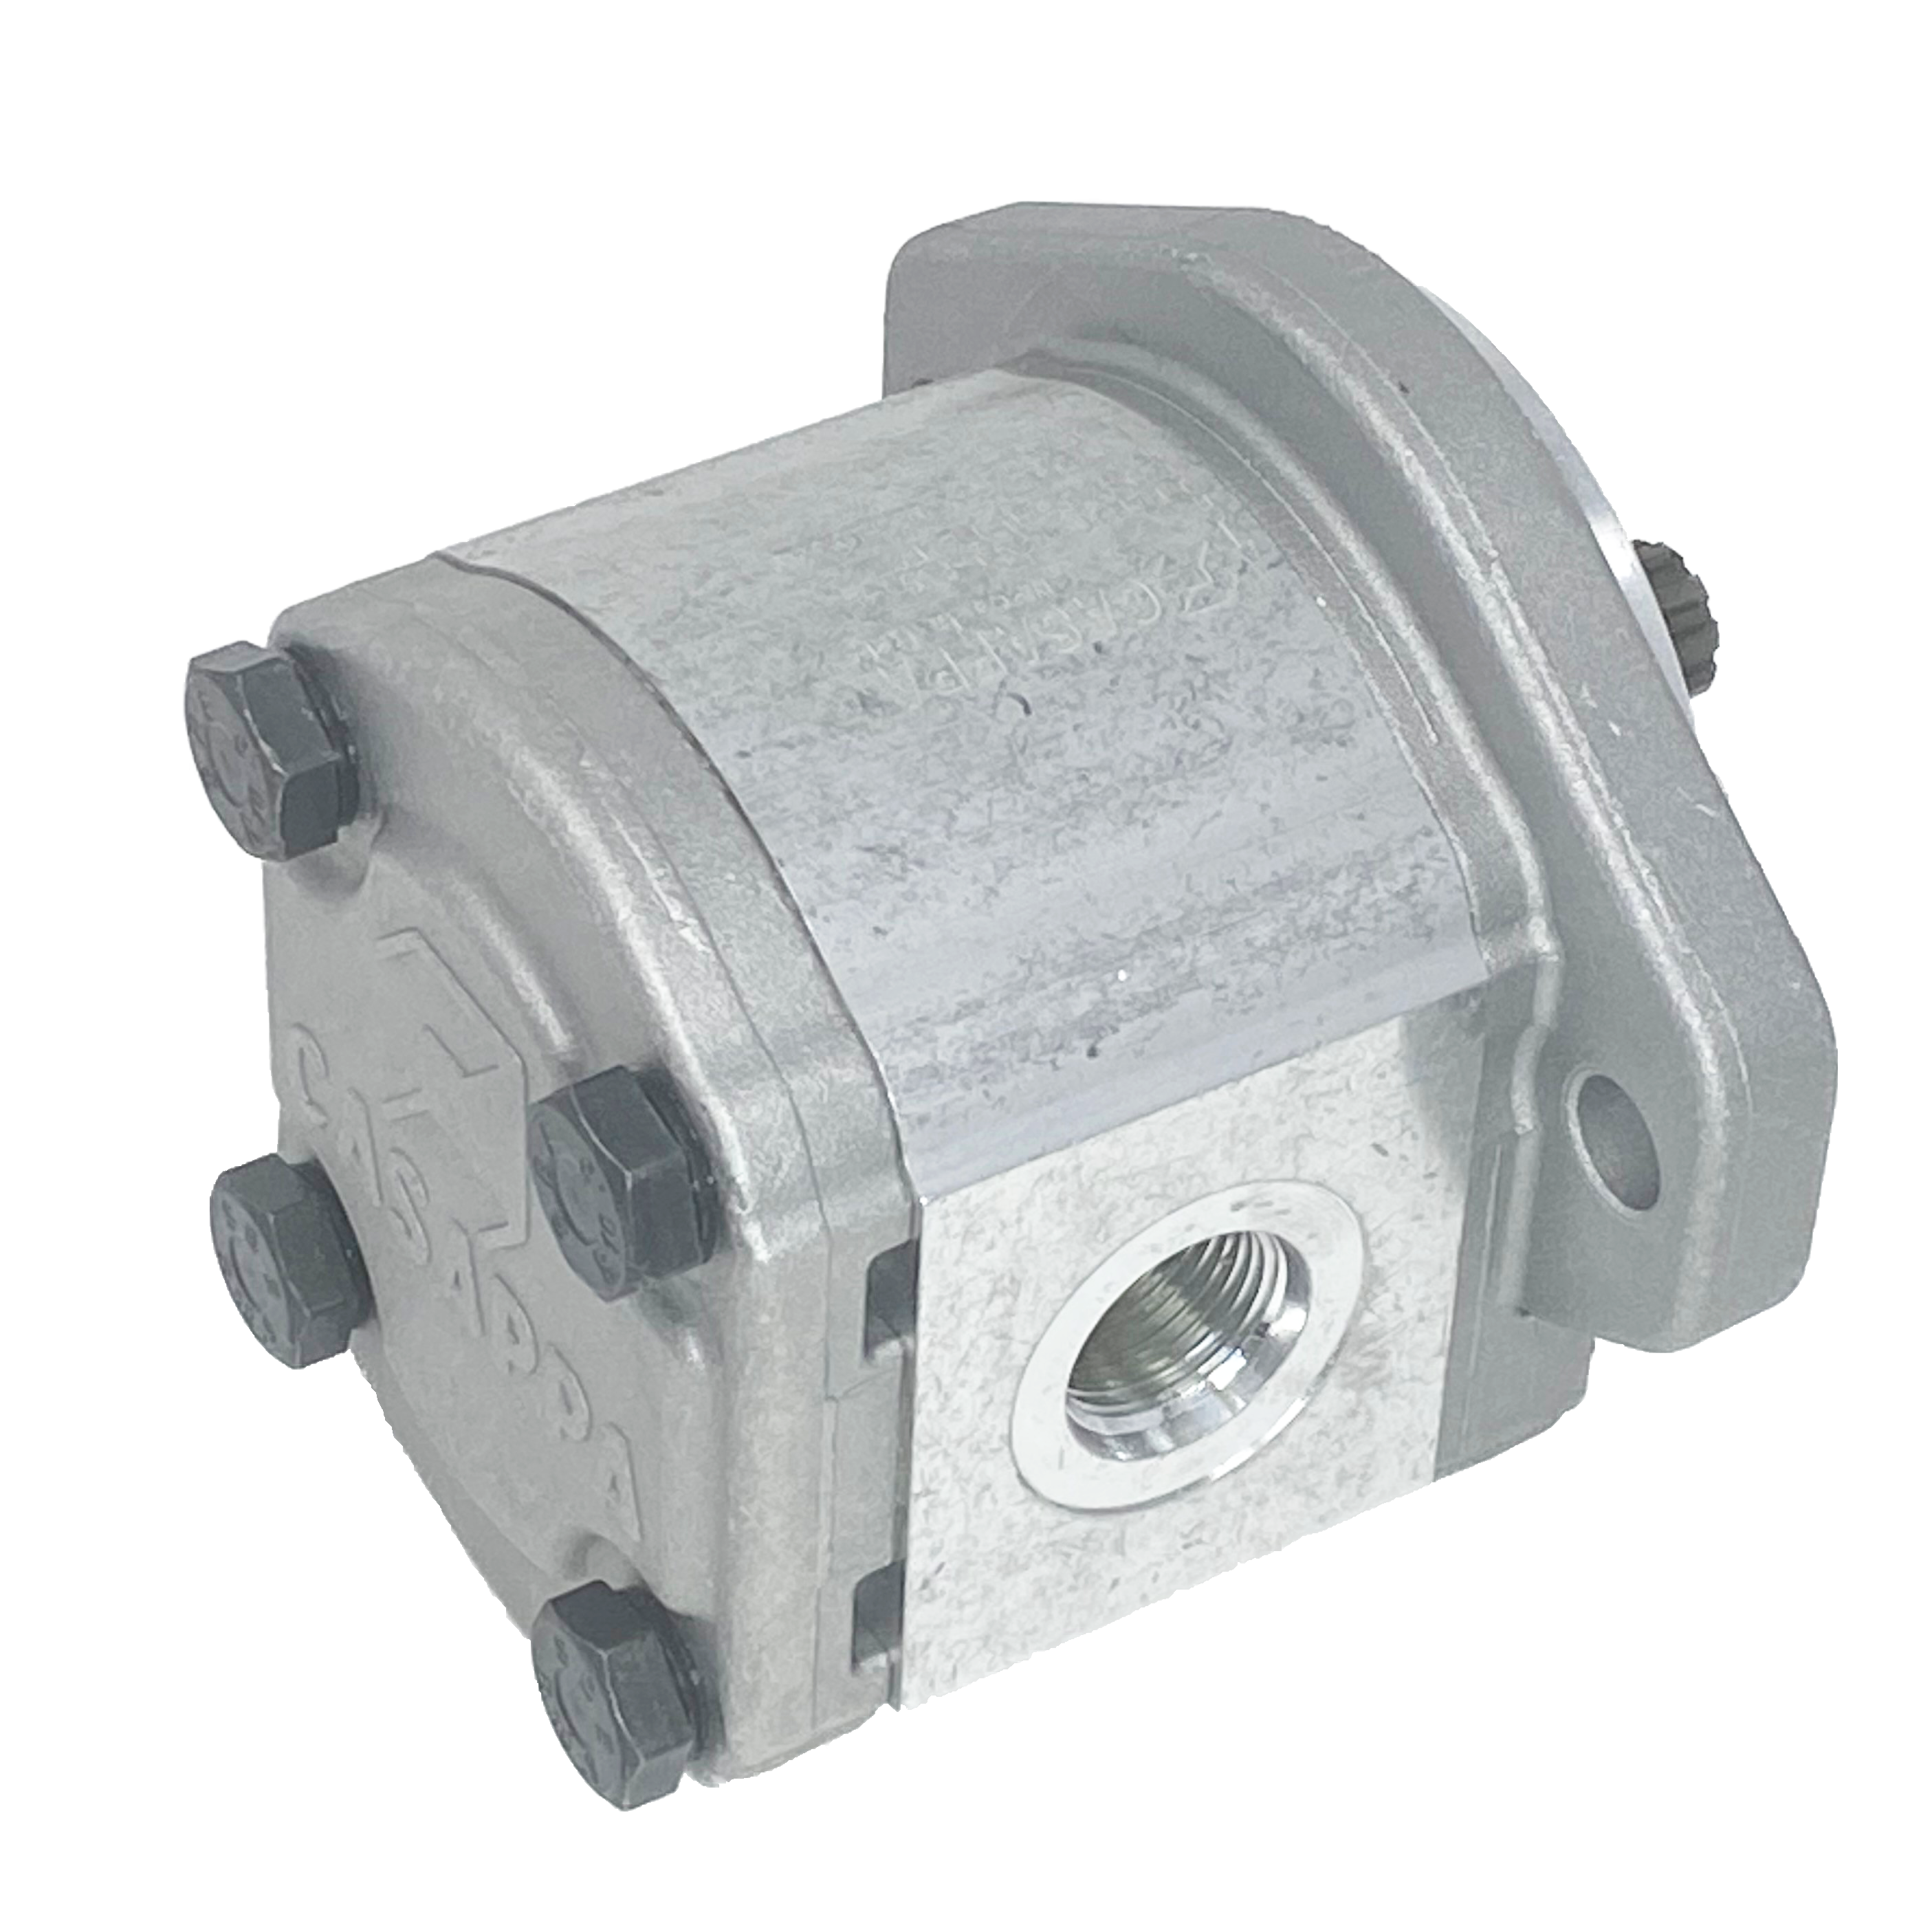 PLP20.16S0-31S1-LOF/OC-S7-N-EL-FS : Casappa Polaris Gear Pump, 16.85cc, 3625psi Rated, 3000RPM, CCW, 5/8" Keyed Shaft, SAE A 2-Bolt Flange, 1" #16 SAE Inlet, 0.625 (5/8") #10 SAE Outlet, Aluminum Body & Flange